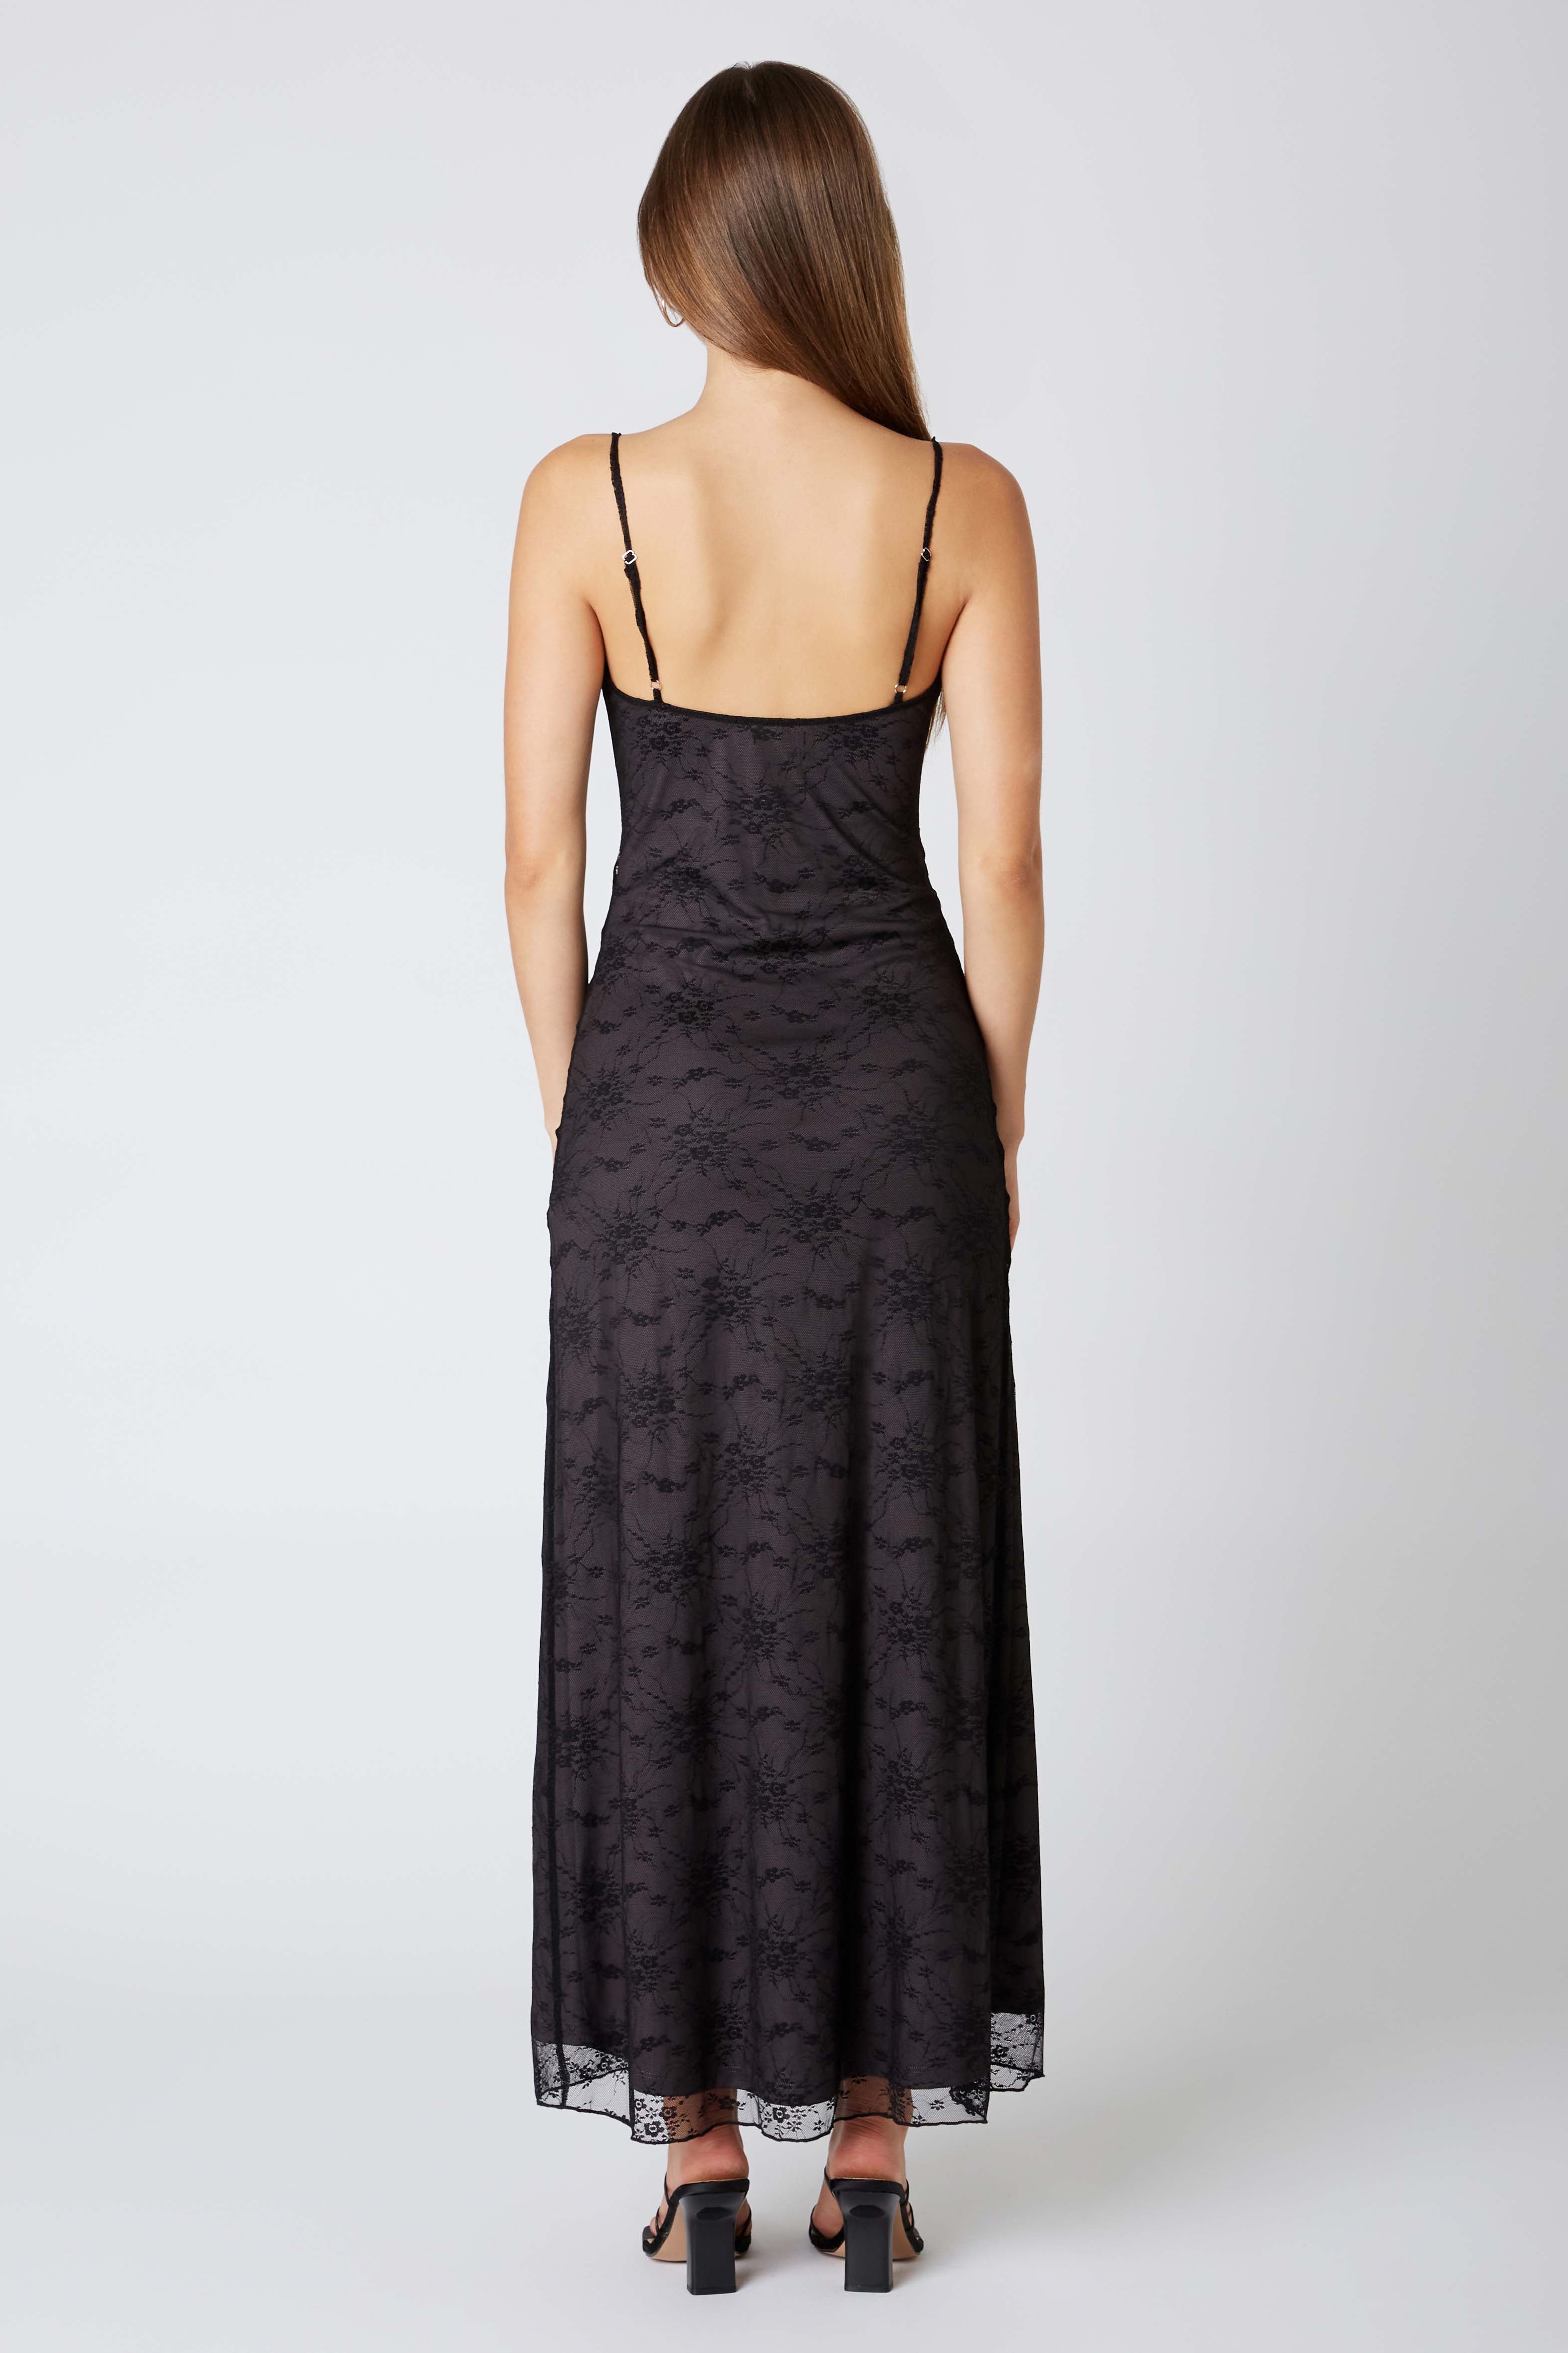 Lace Maxi Dress in Black Back View